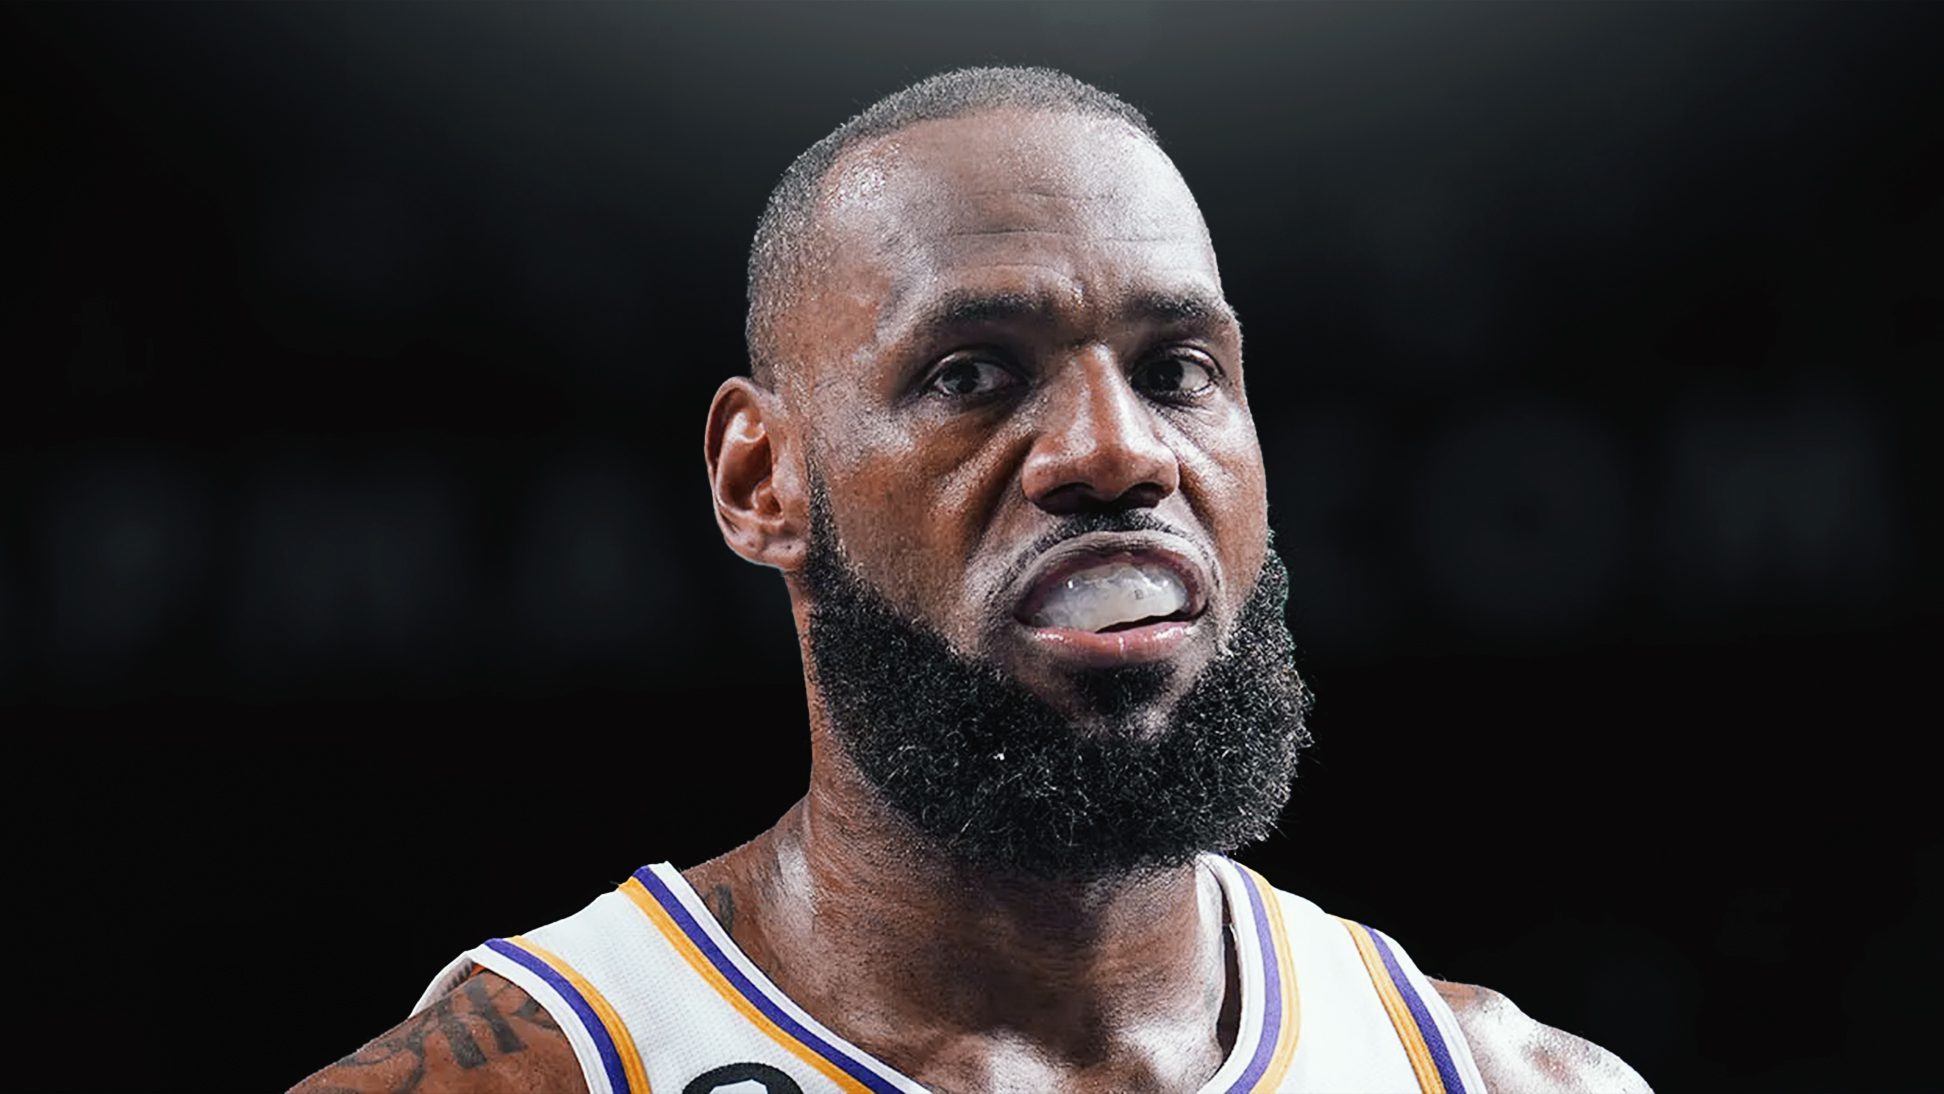 Respected Sports Doctor Gives Theory About What Really Happened to LeBron’s Foot